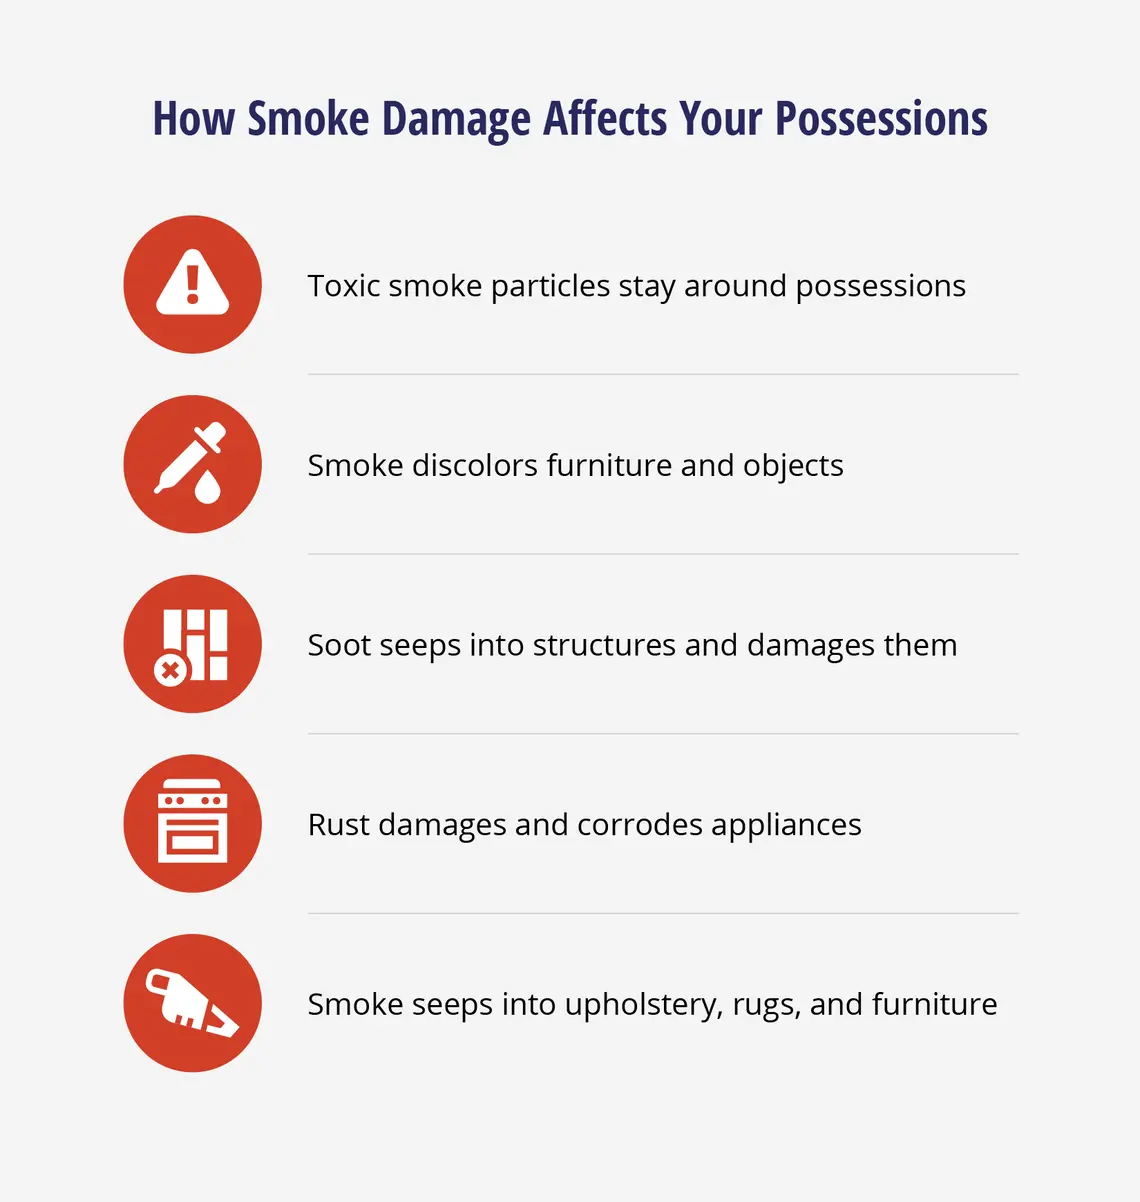 How Smoke Damage Affects Your Possessions